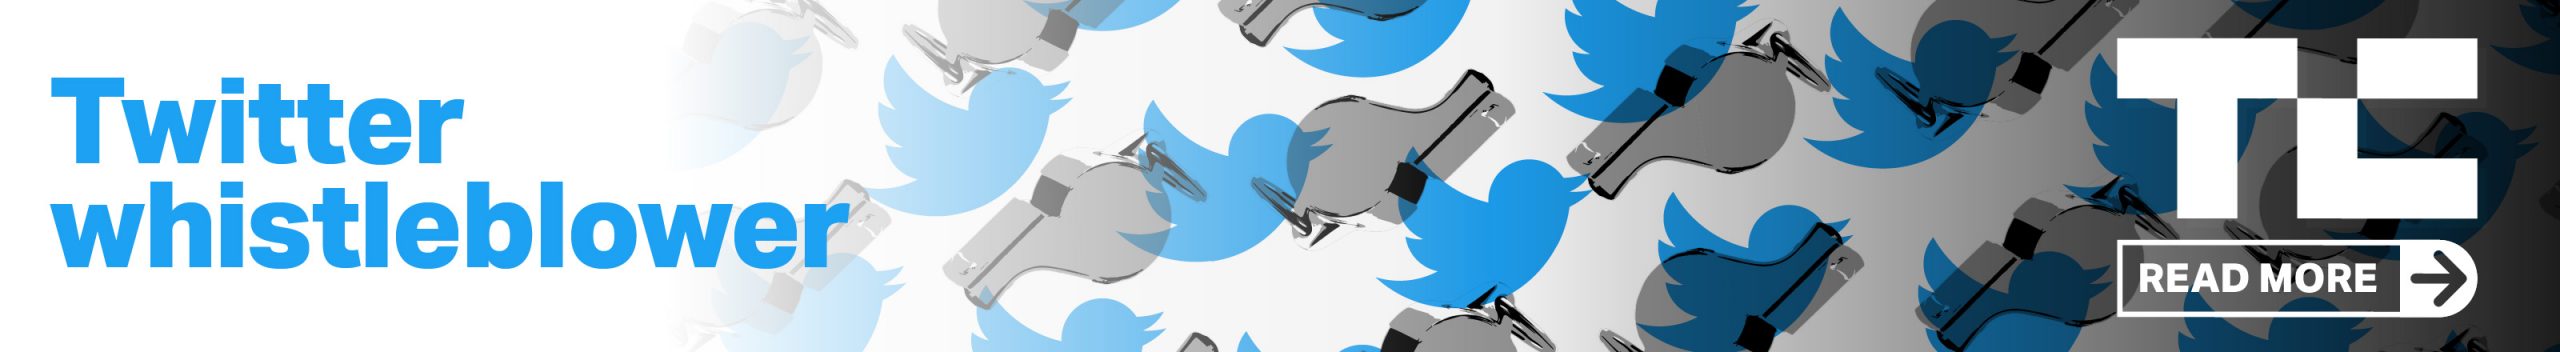 Twitter whistleblower says platform was unable to guard against insider threats on January 6